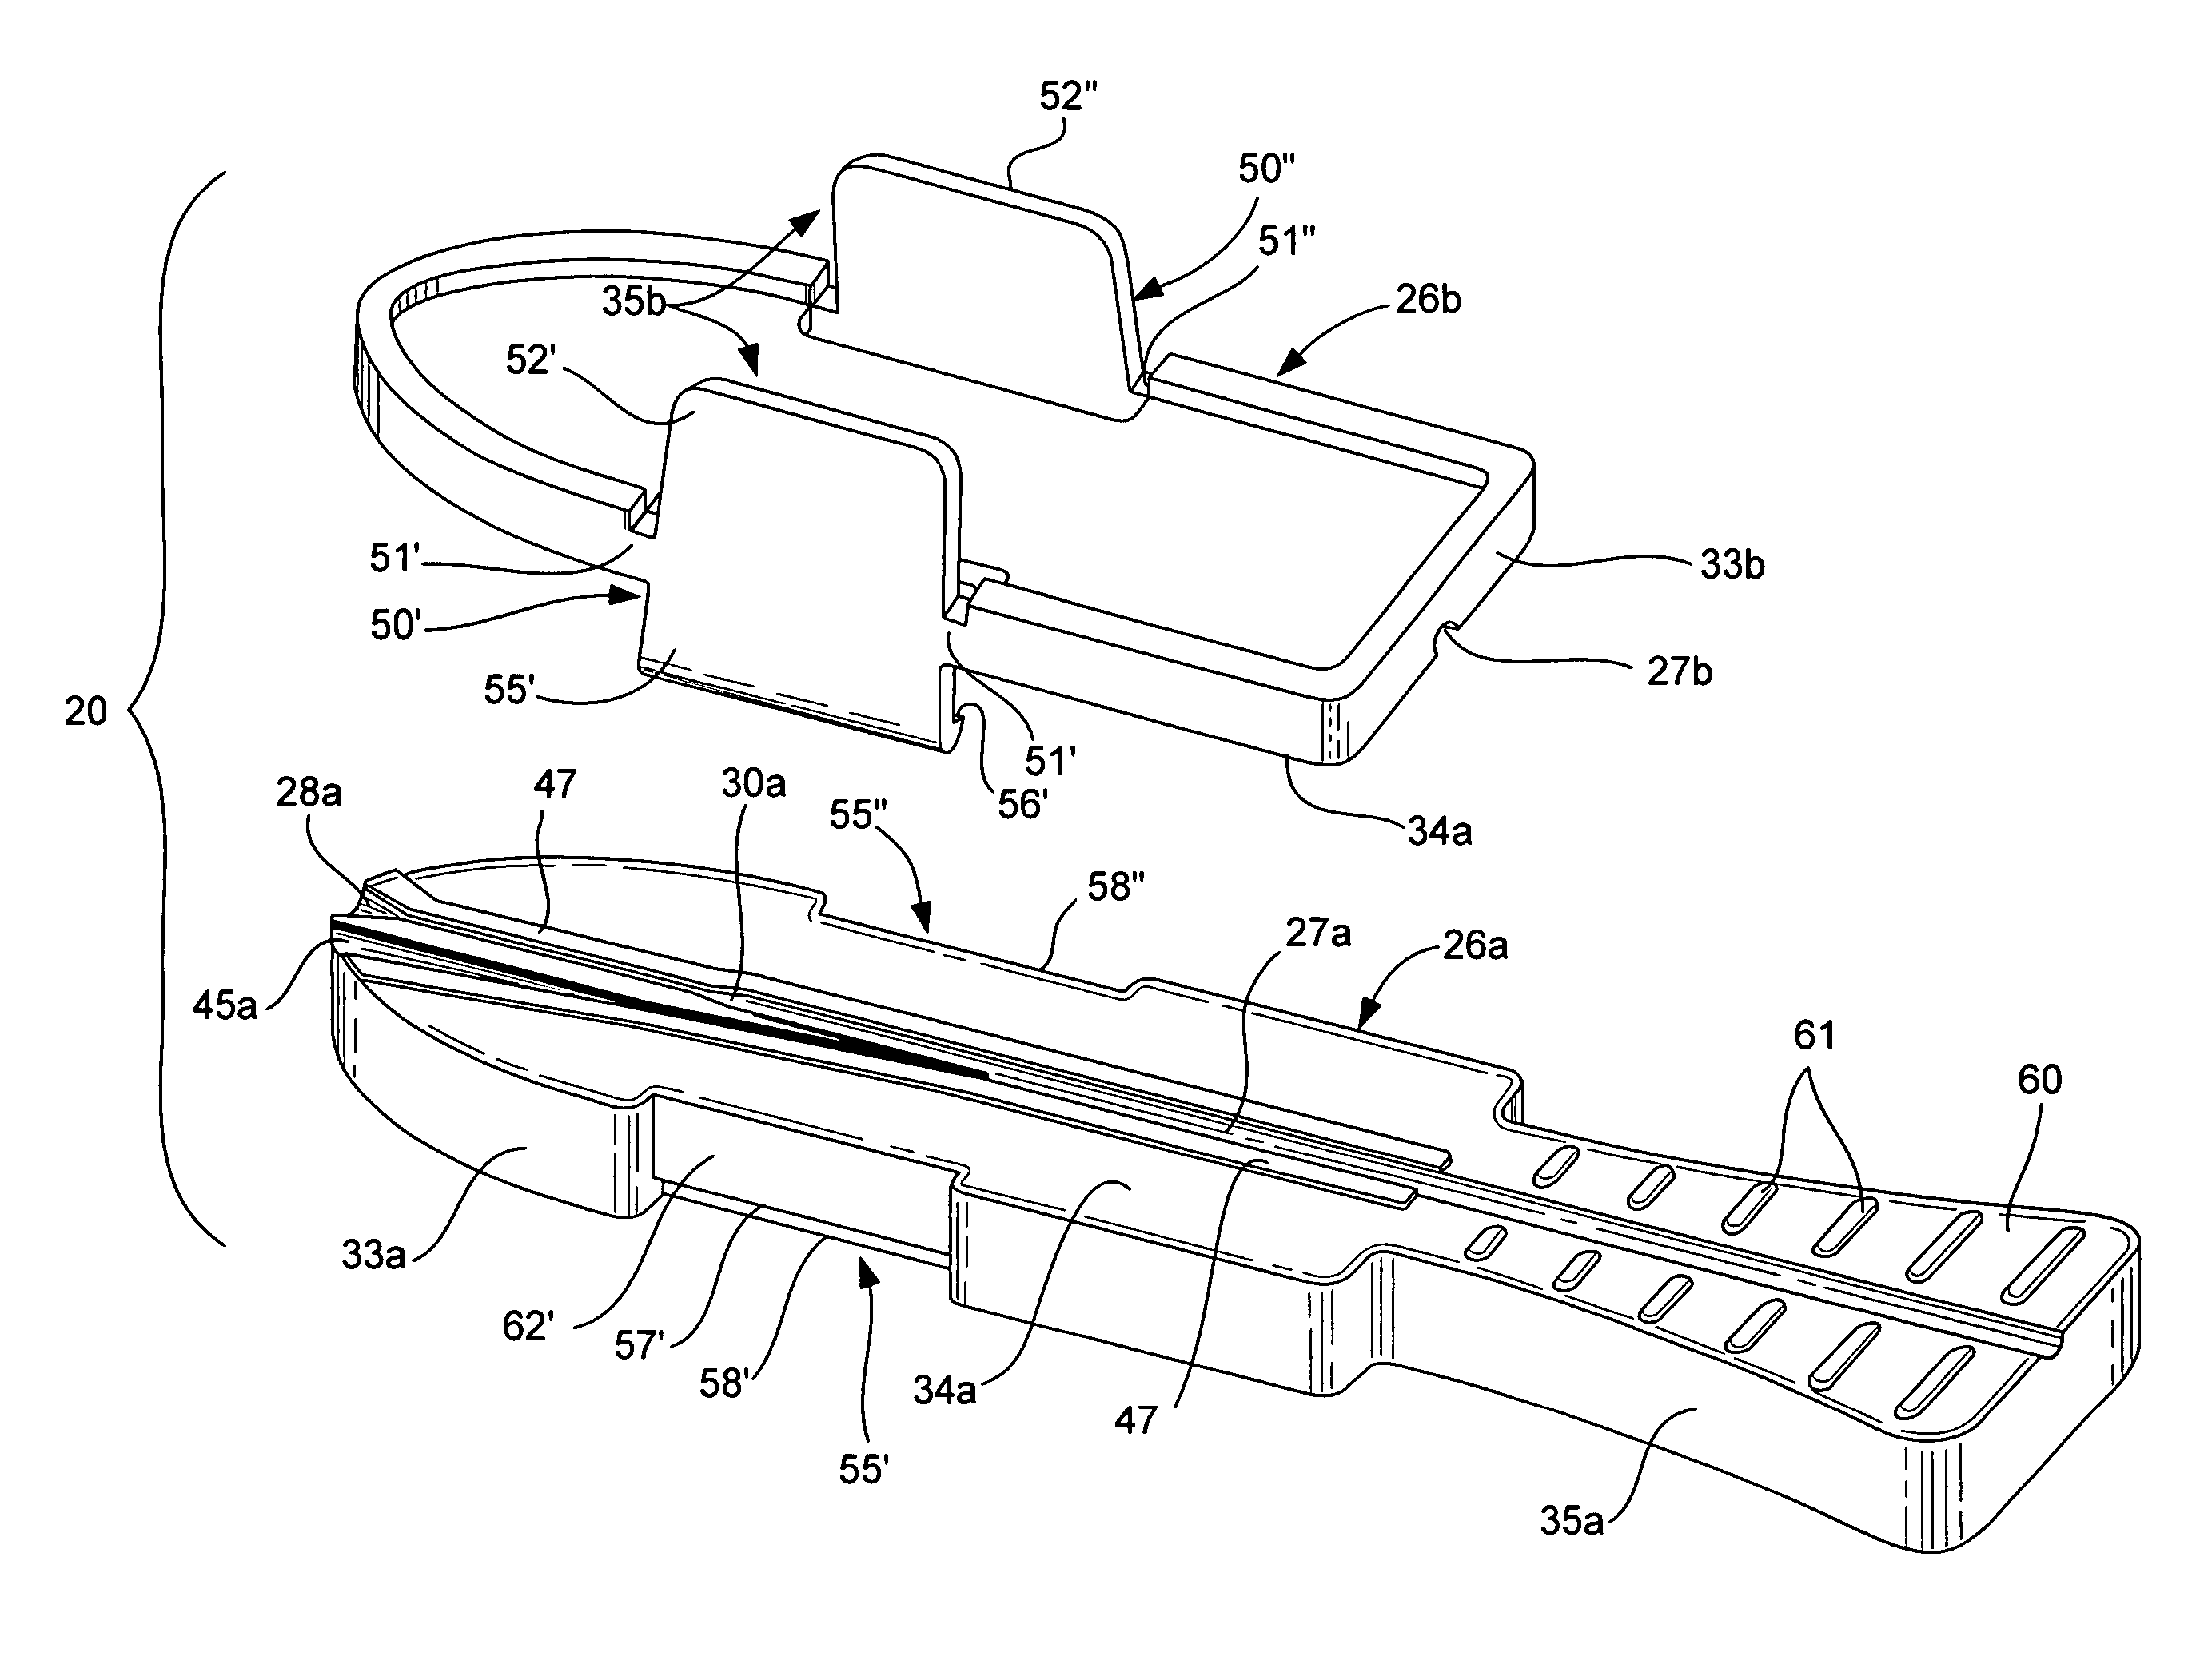 Guidewire loader apparatus and method